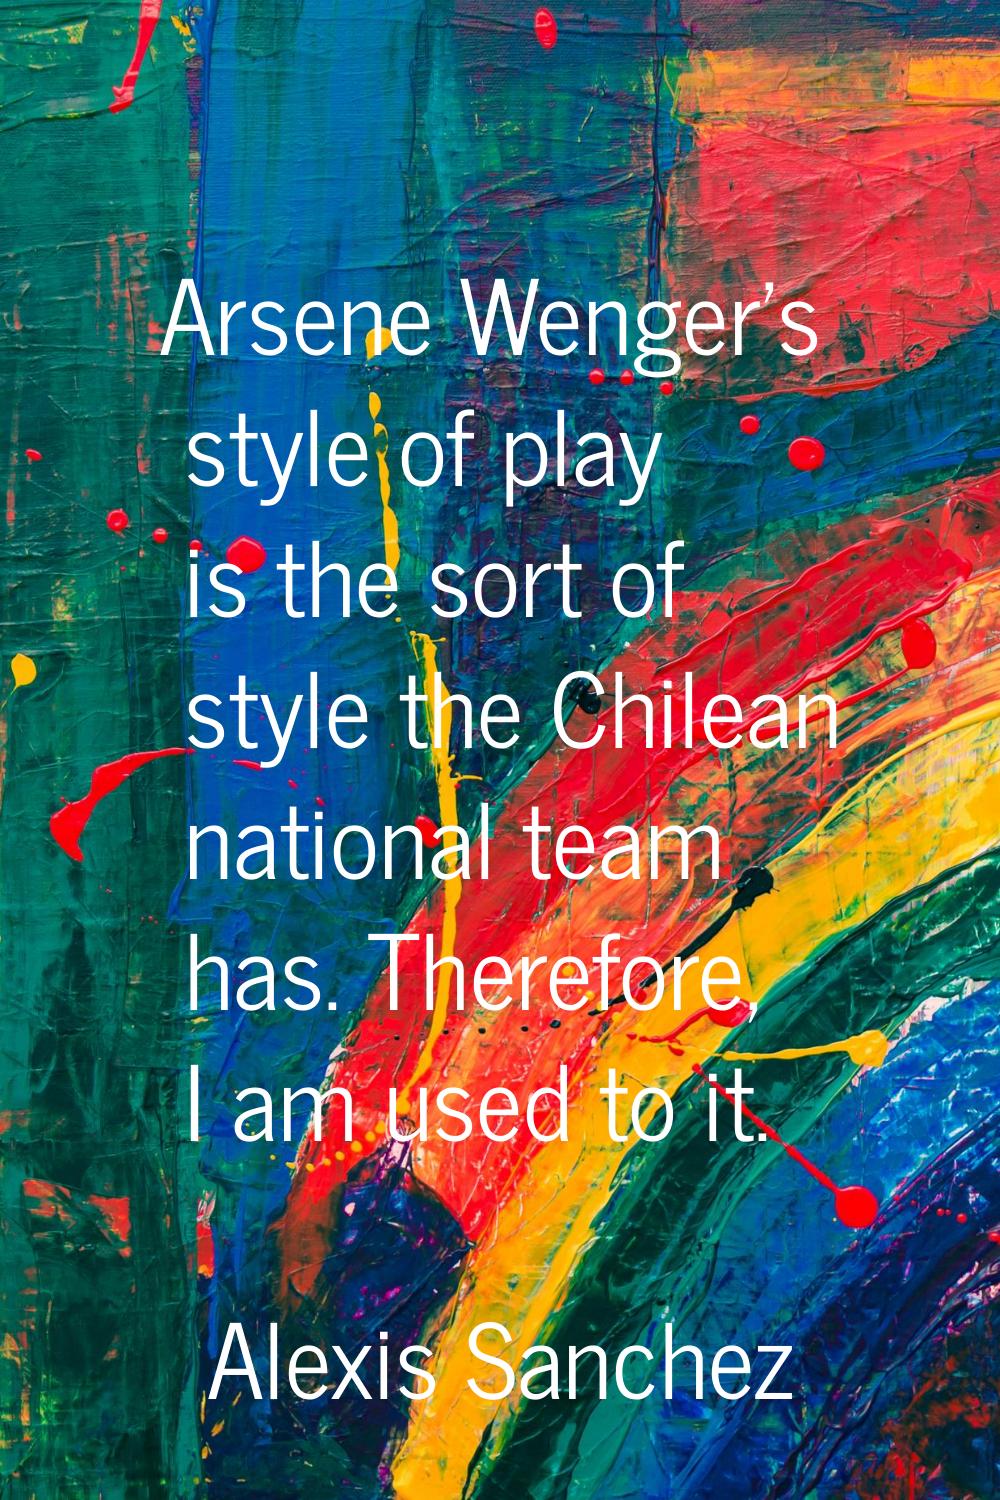 Arsene Wenger's style of play is the sort of style the Chilean national team has. Therefore, I am u